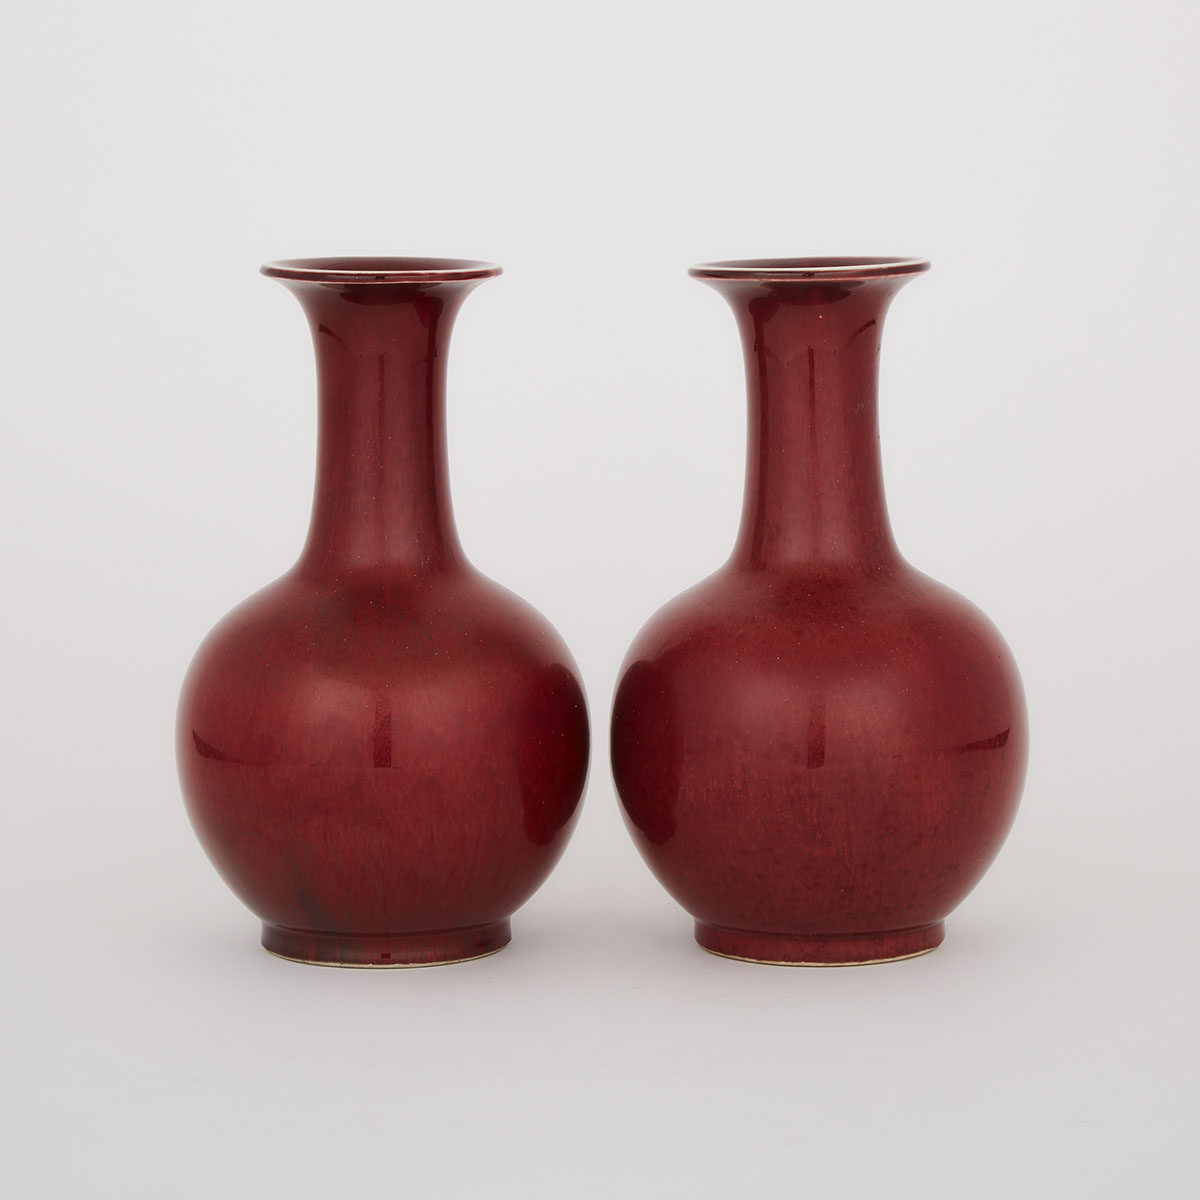 A Pair of Oxblood Red Vases